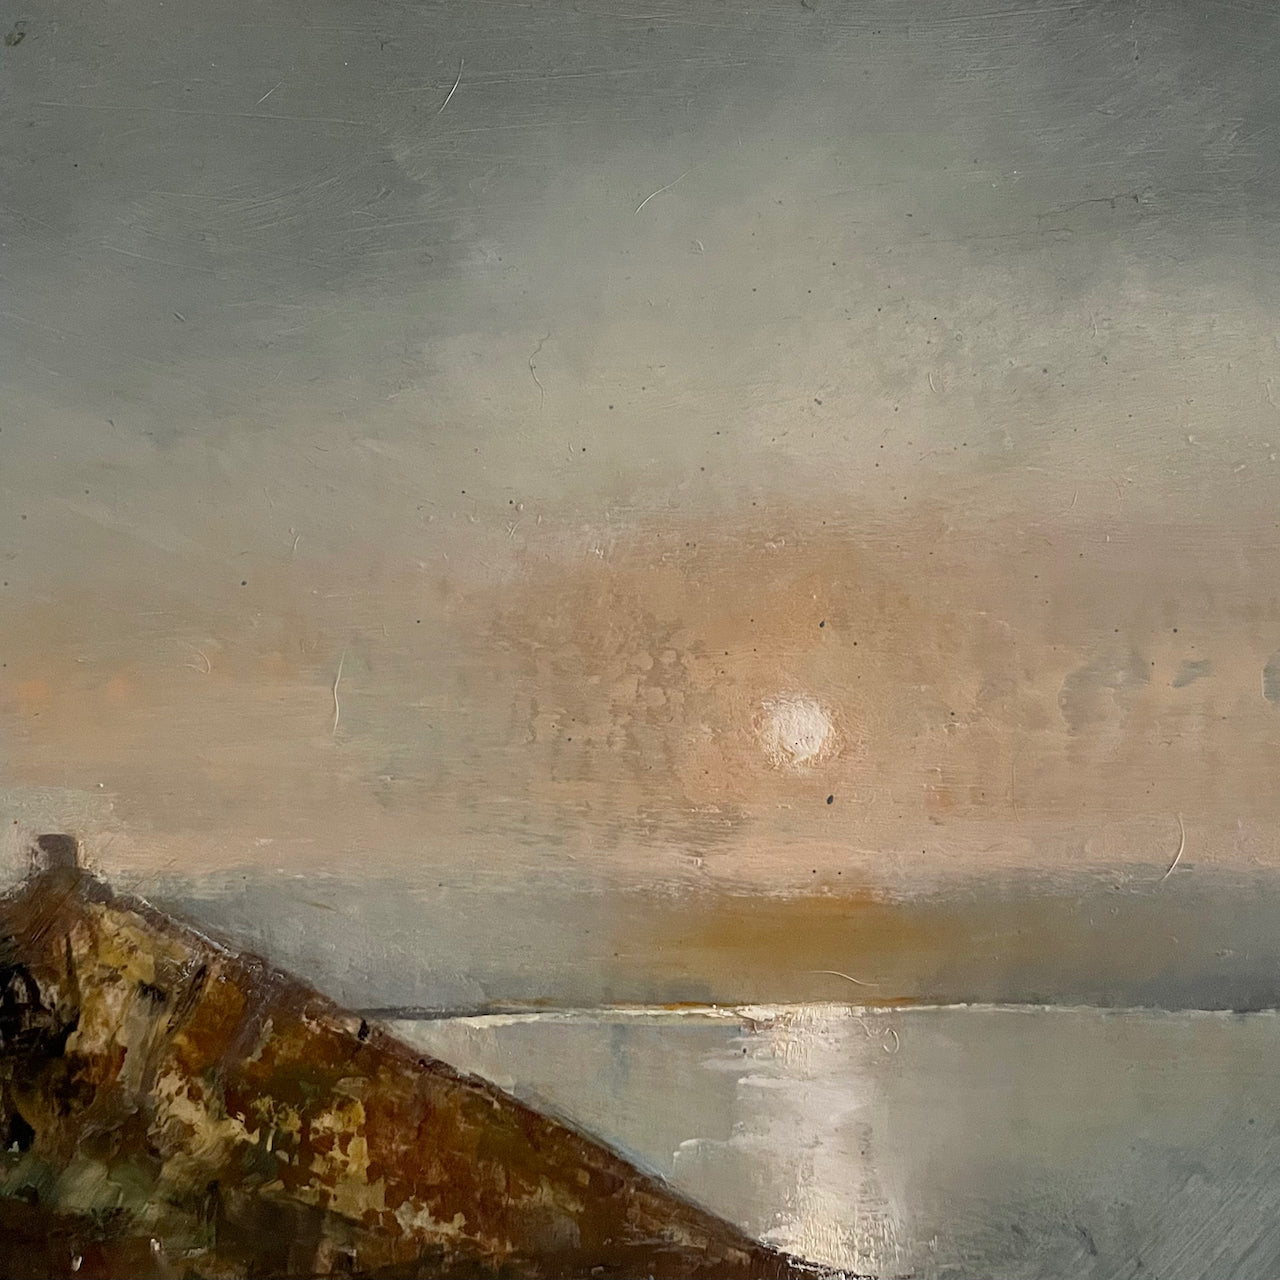 Sunrise seascape with Rame Head in foreground by artist Julie Ellis